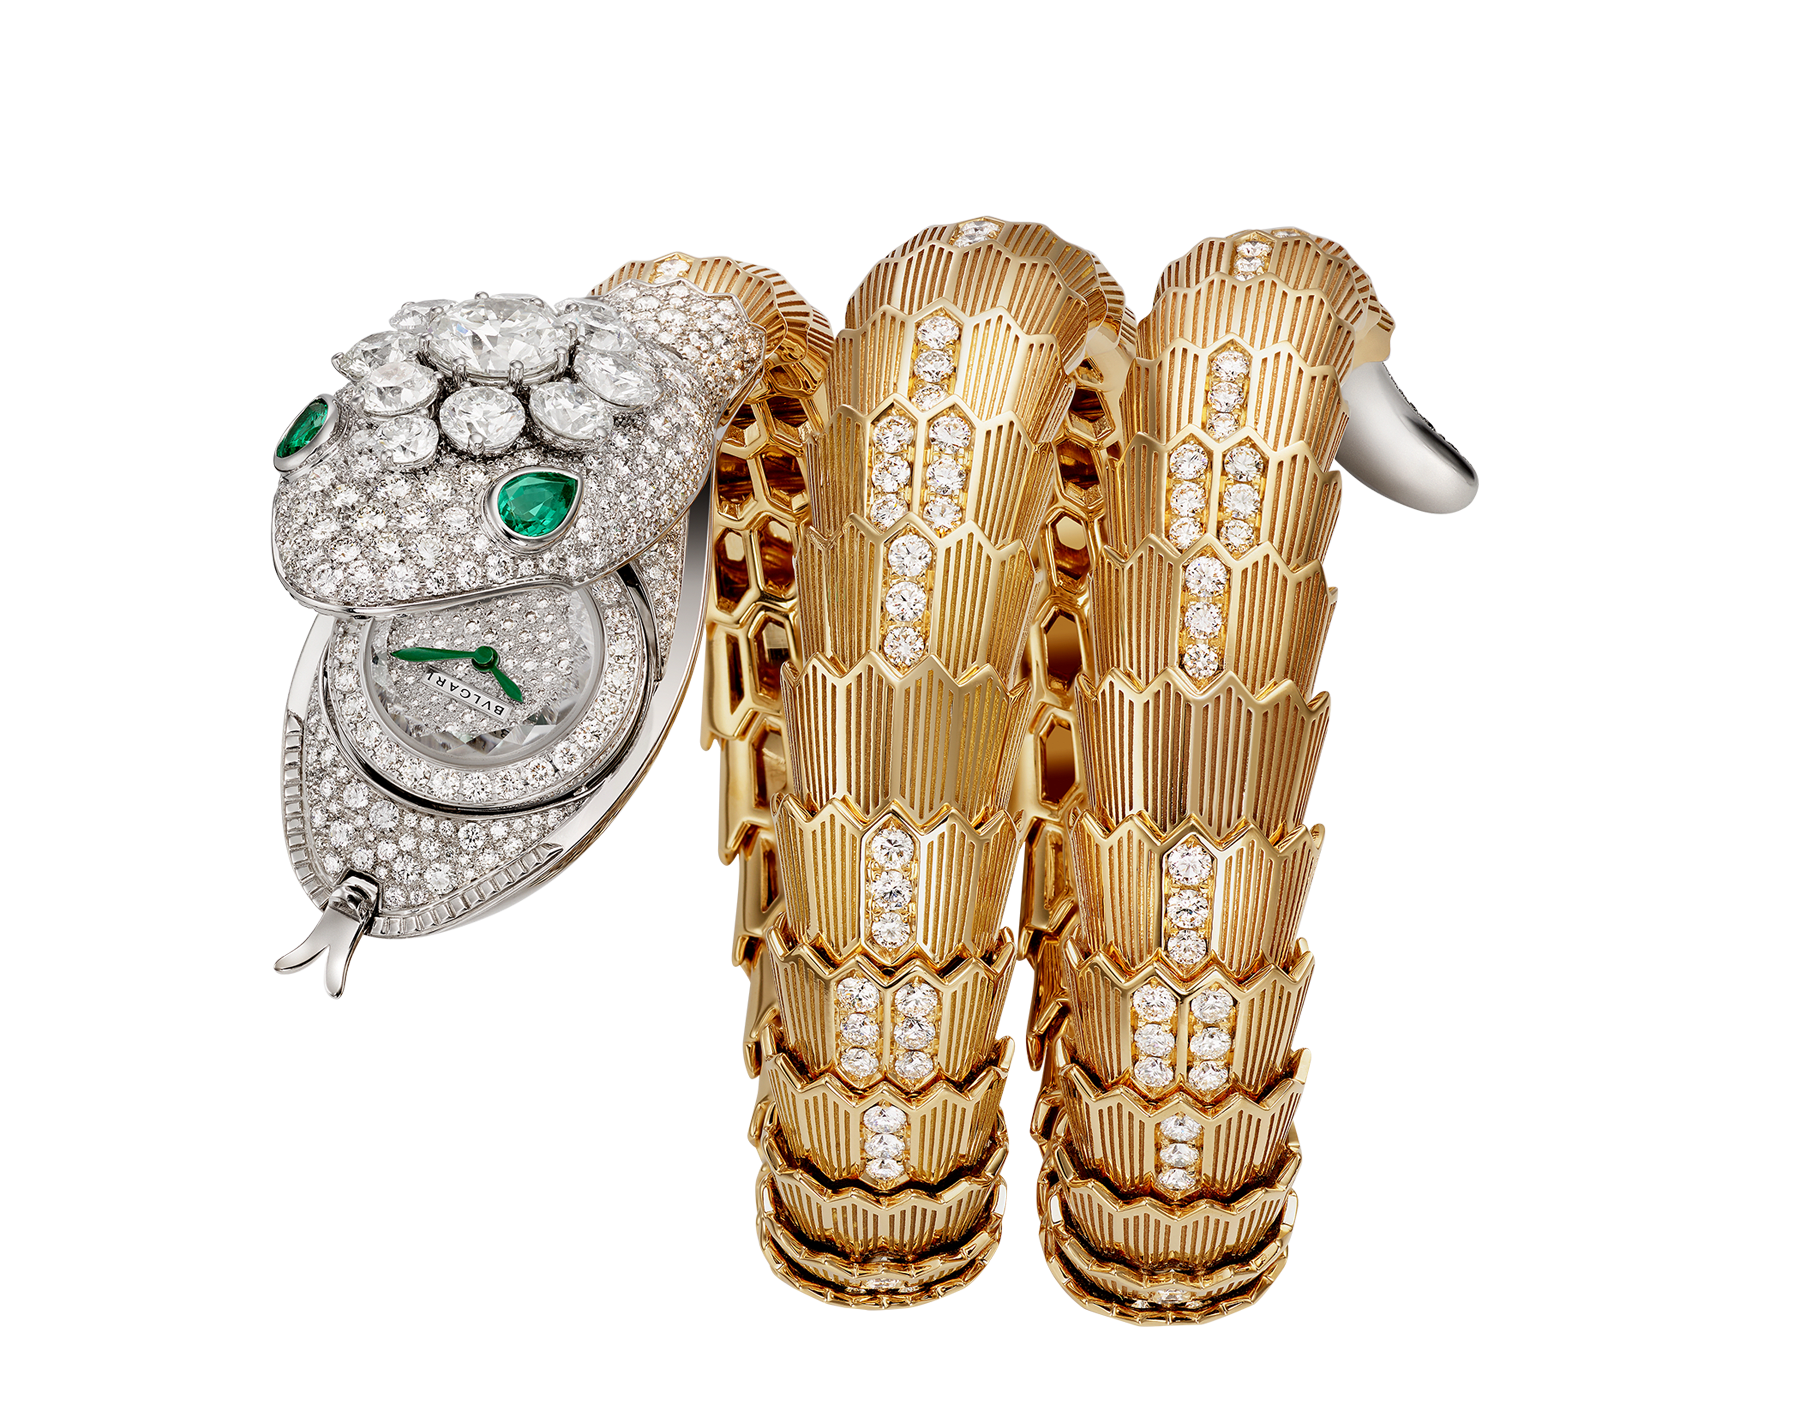 Serpenti Misteriosi High Jewellery secret watch with mechanical manufacture micro-movement with manual winding, 18 kt white and yellow gold case and bracelet set with brilliant-cut diamonds and two pear-cut emeralds and pavé-set diamond dial. 103561 image 1